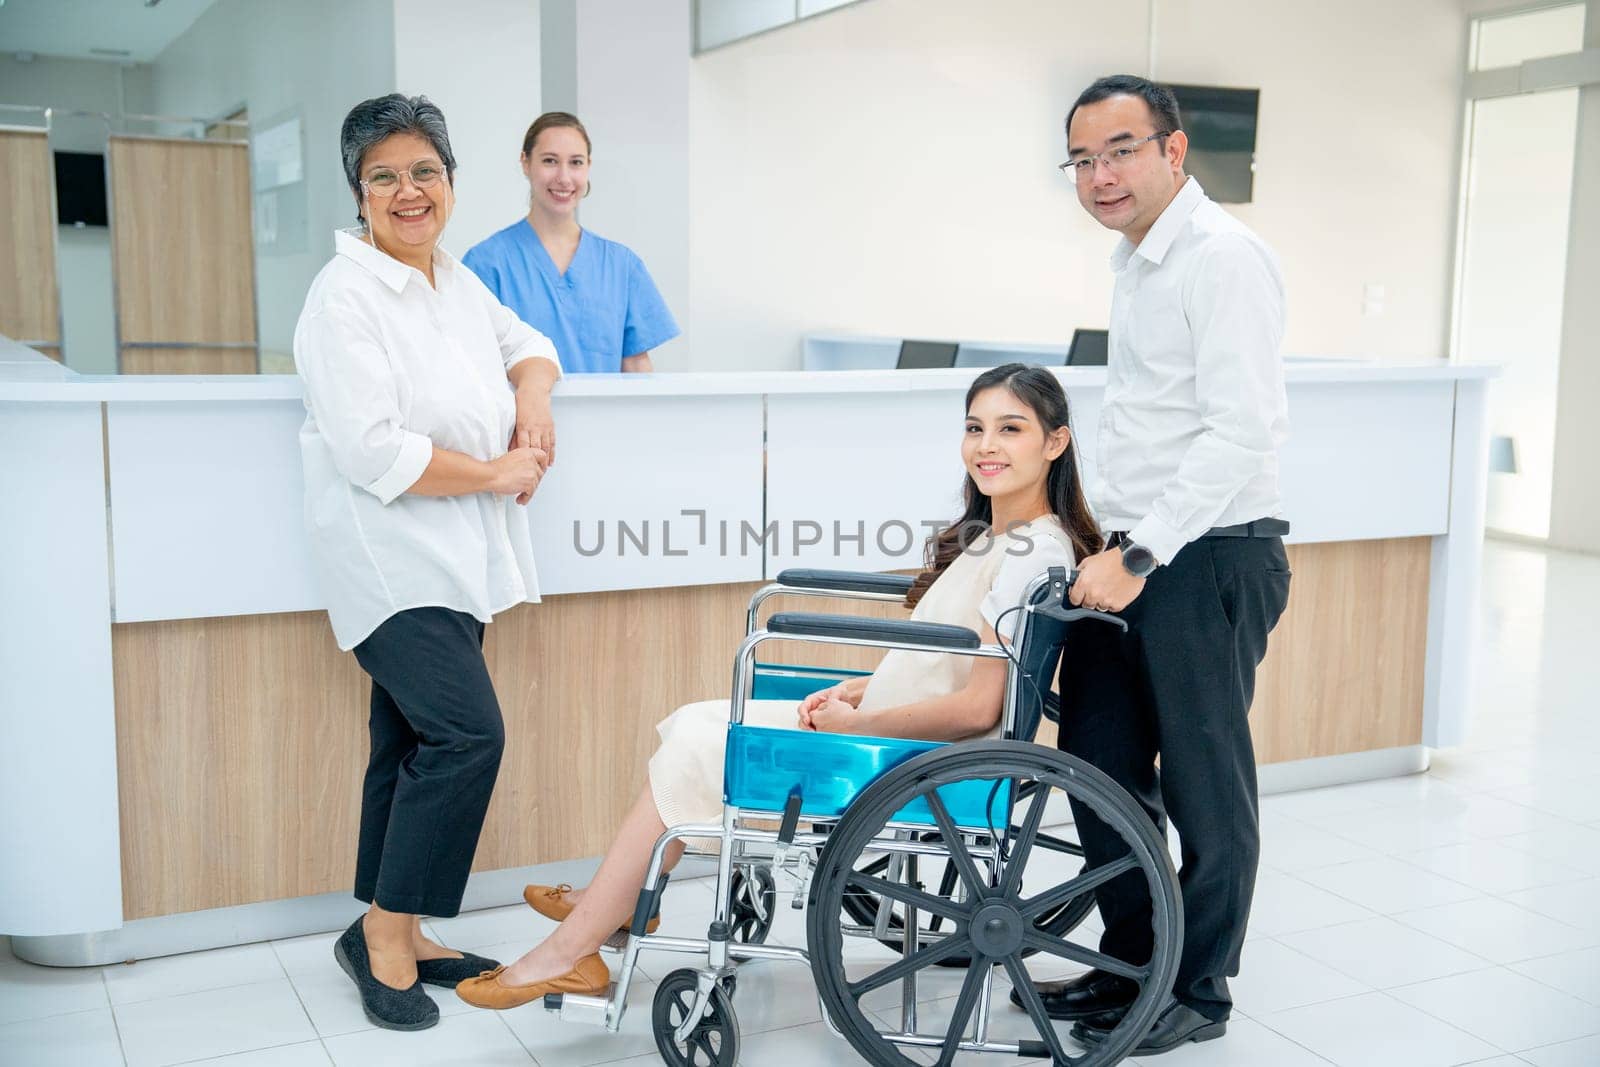 Asian family with senior woman, pregnancy woman sit on wheelchair and man take care the woman, they look at camera with nurse is smiling in the background in area of registration of hospital.